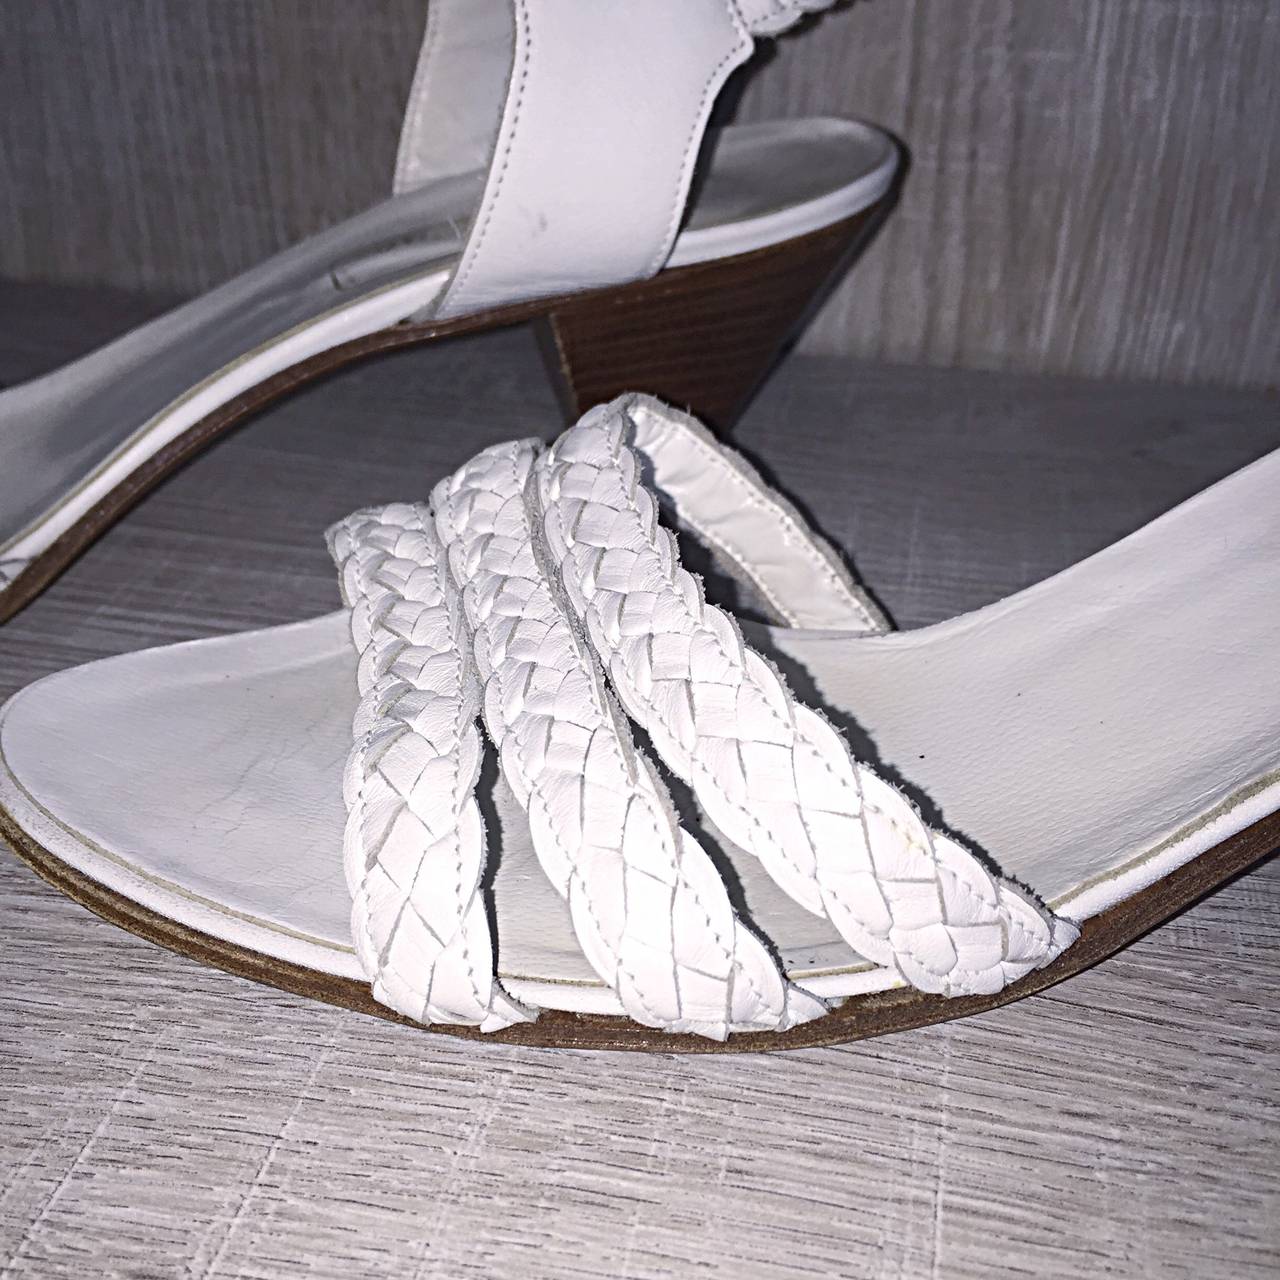 Gray 1960s Vintage Capucine Sz. 40 / 9.5 - 10 White Leather Sandals Heels Shoes Italy For Sale